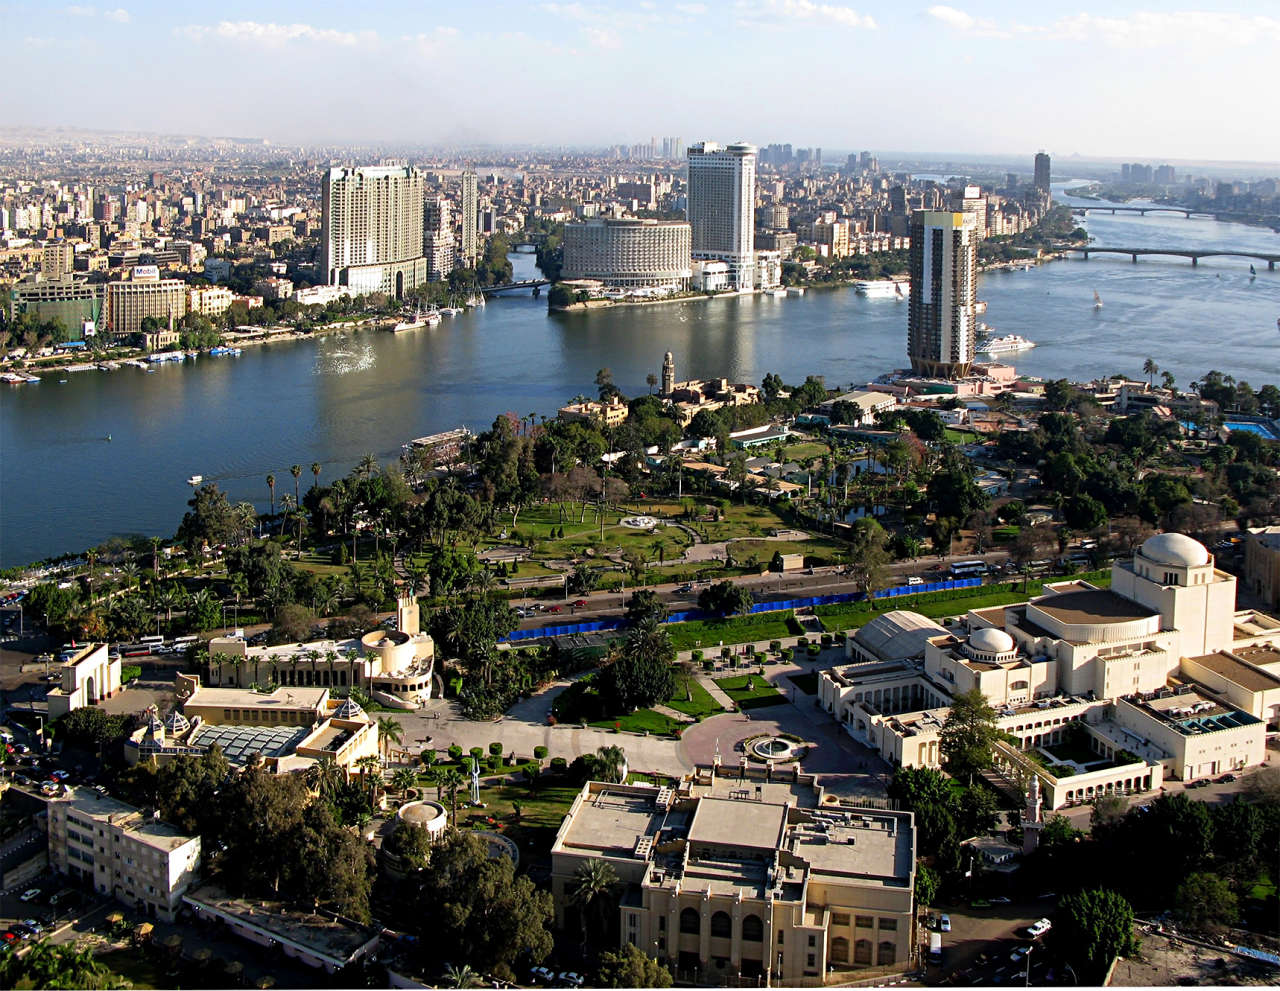 Egypt restricts women traveling to Turkey